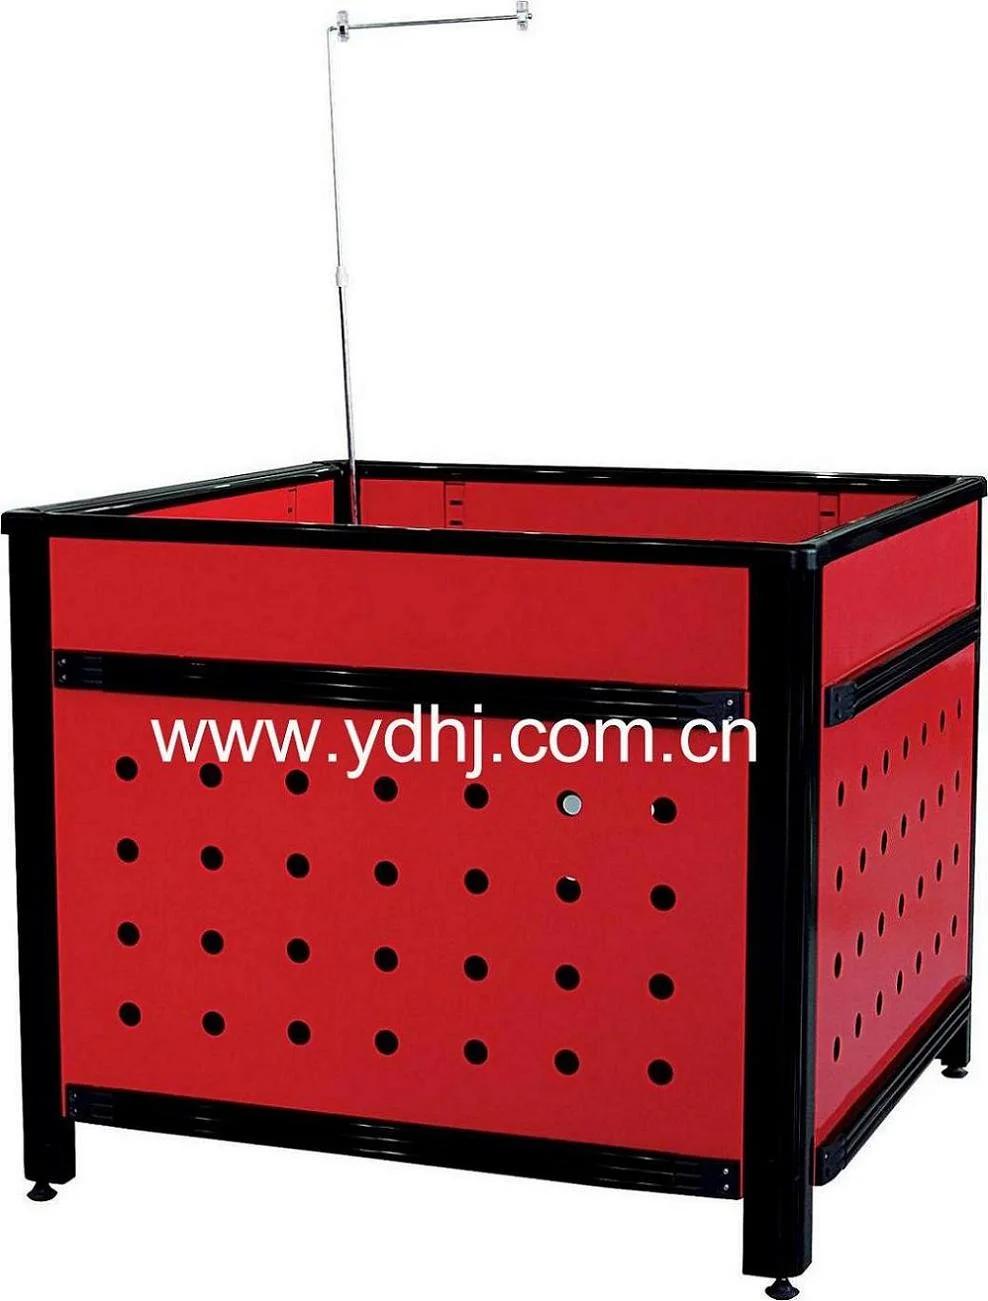 Supermarket Display Counter Stand, Promotion Table Equipment (YD-N)